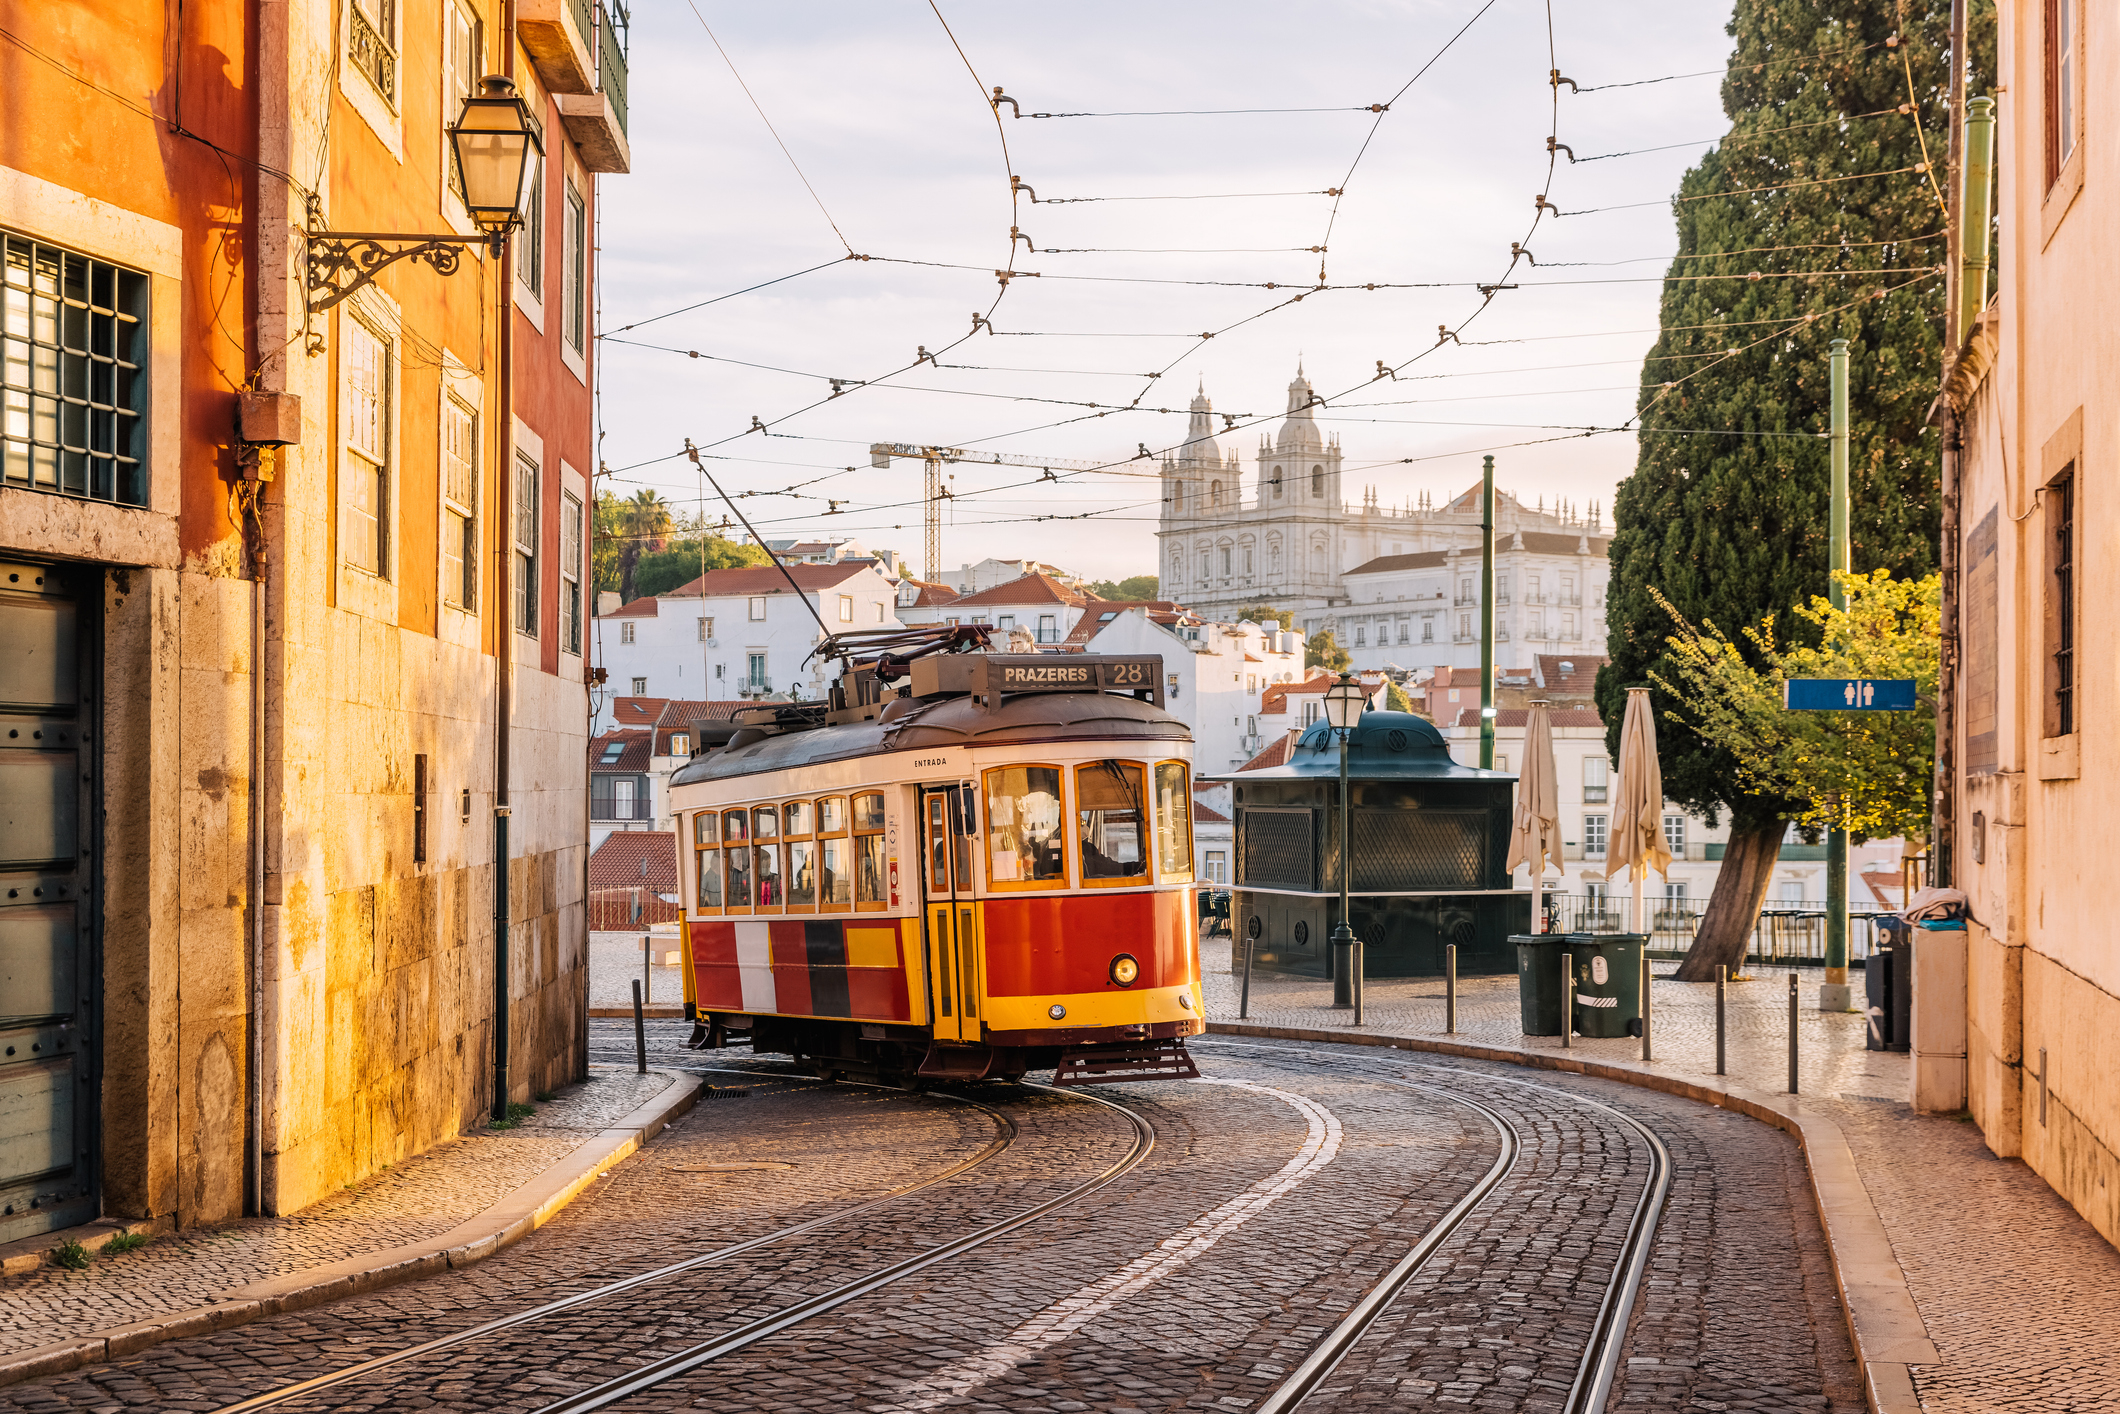 Historic tram on a street in Lisbon with buildings in the background, capturing the essence of local transport in the city